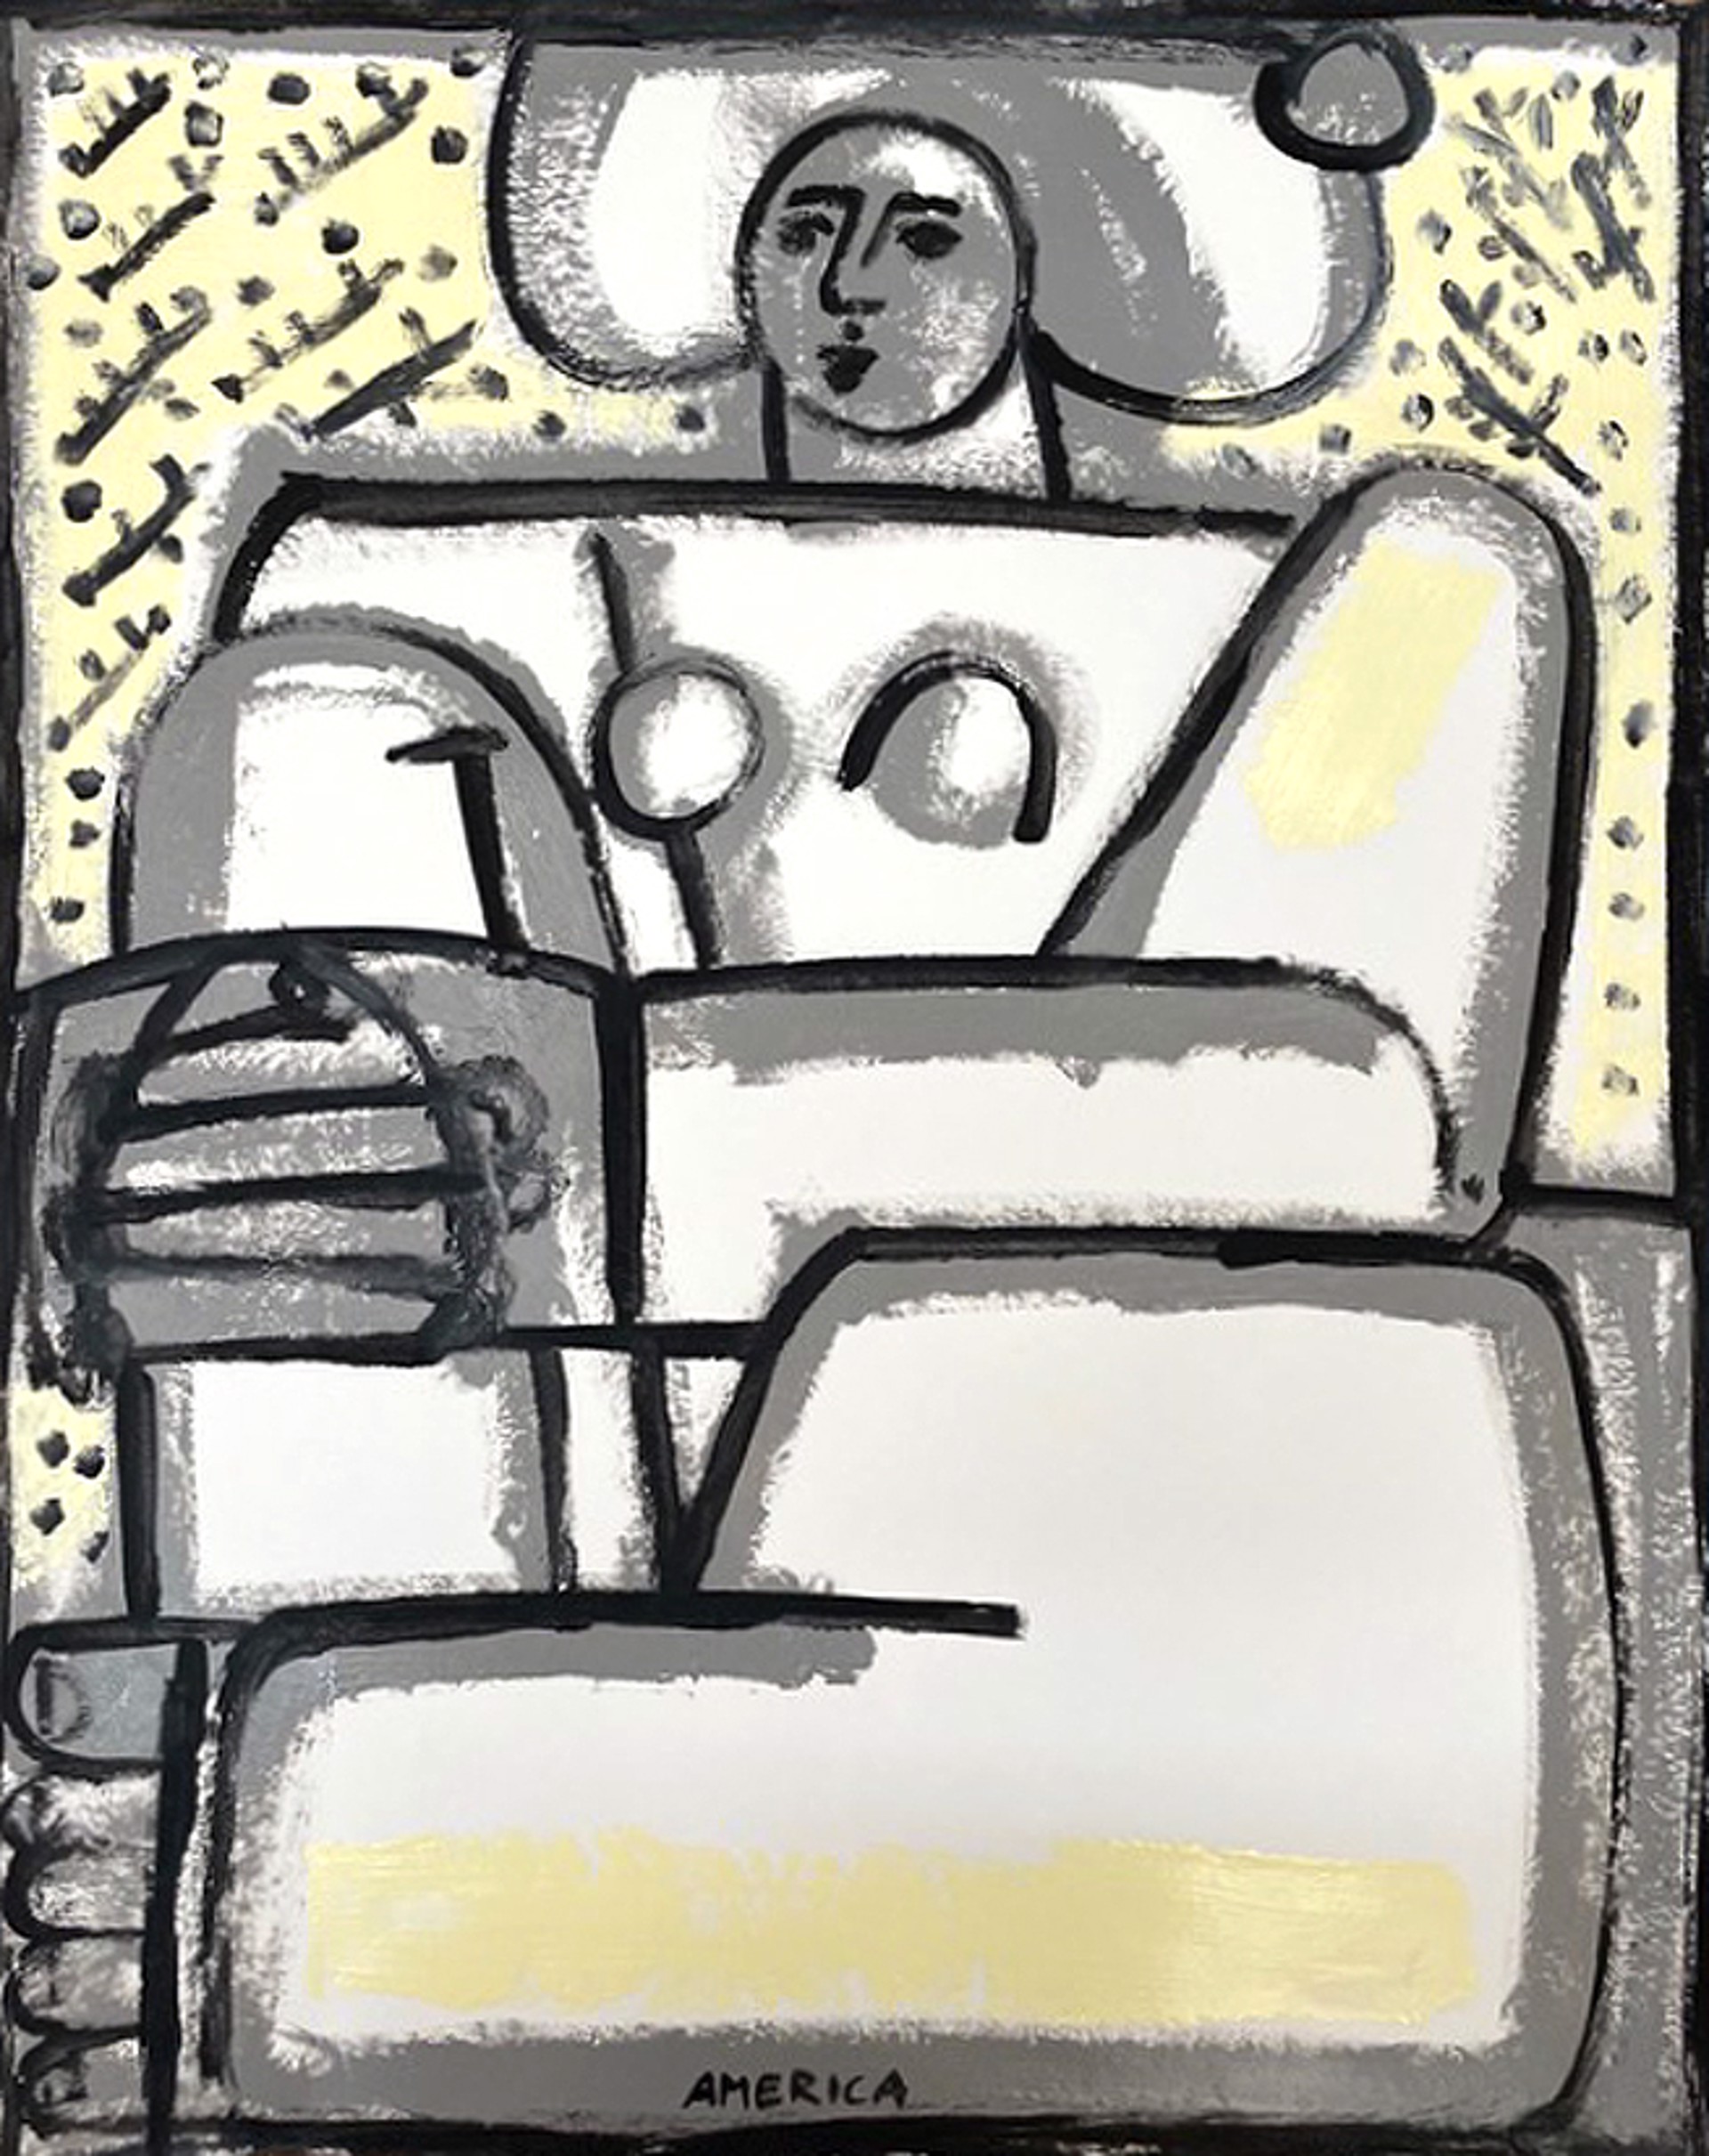 America Martin Painting of a woman in grey and yellow